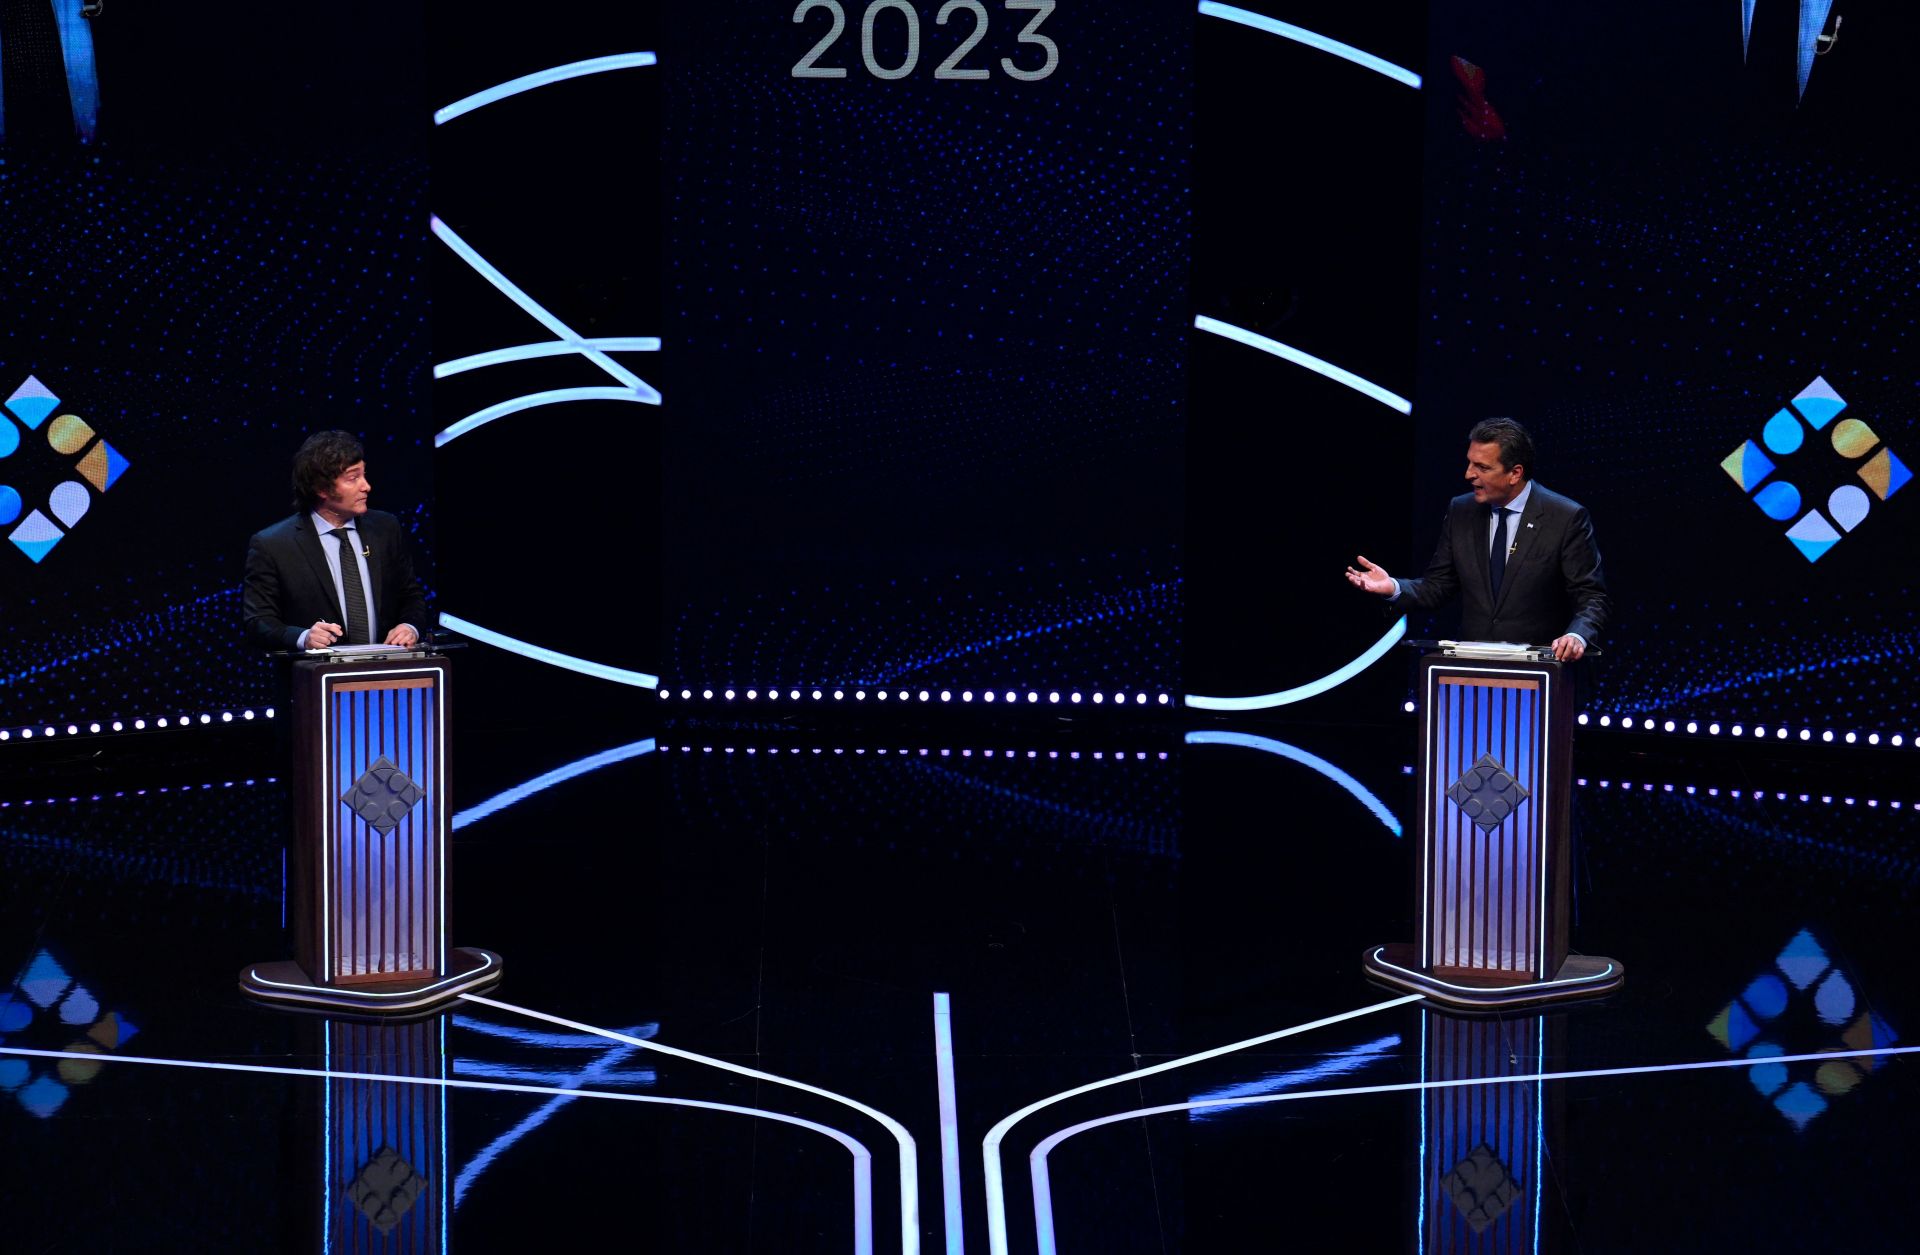 The presidential candidate for the Union por la Patria party, Sergio Massa (R), speaks next to the presidential candidate for the La Libertad Avanza party, Javier Milei, on Nov. 12, 2023, during a presidential debate in Buenos Aires, Argentina.